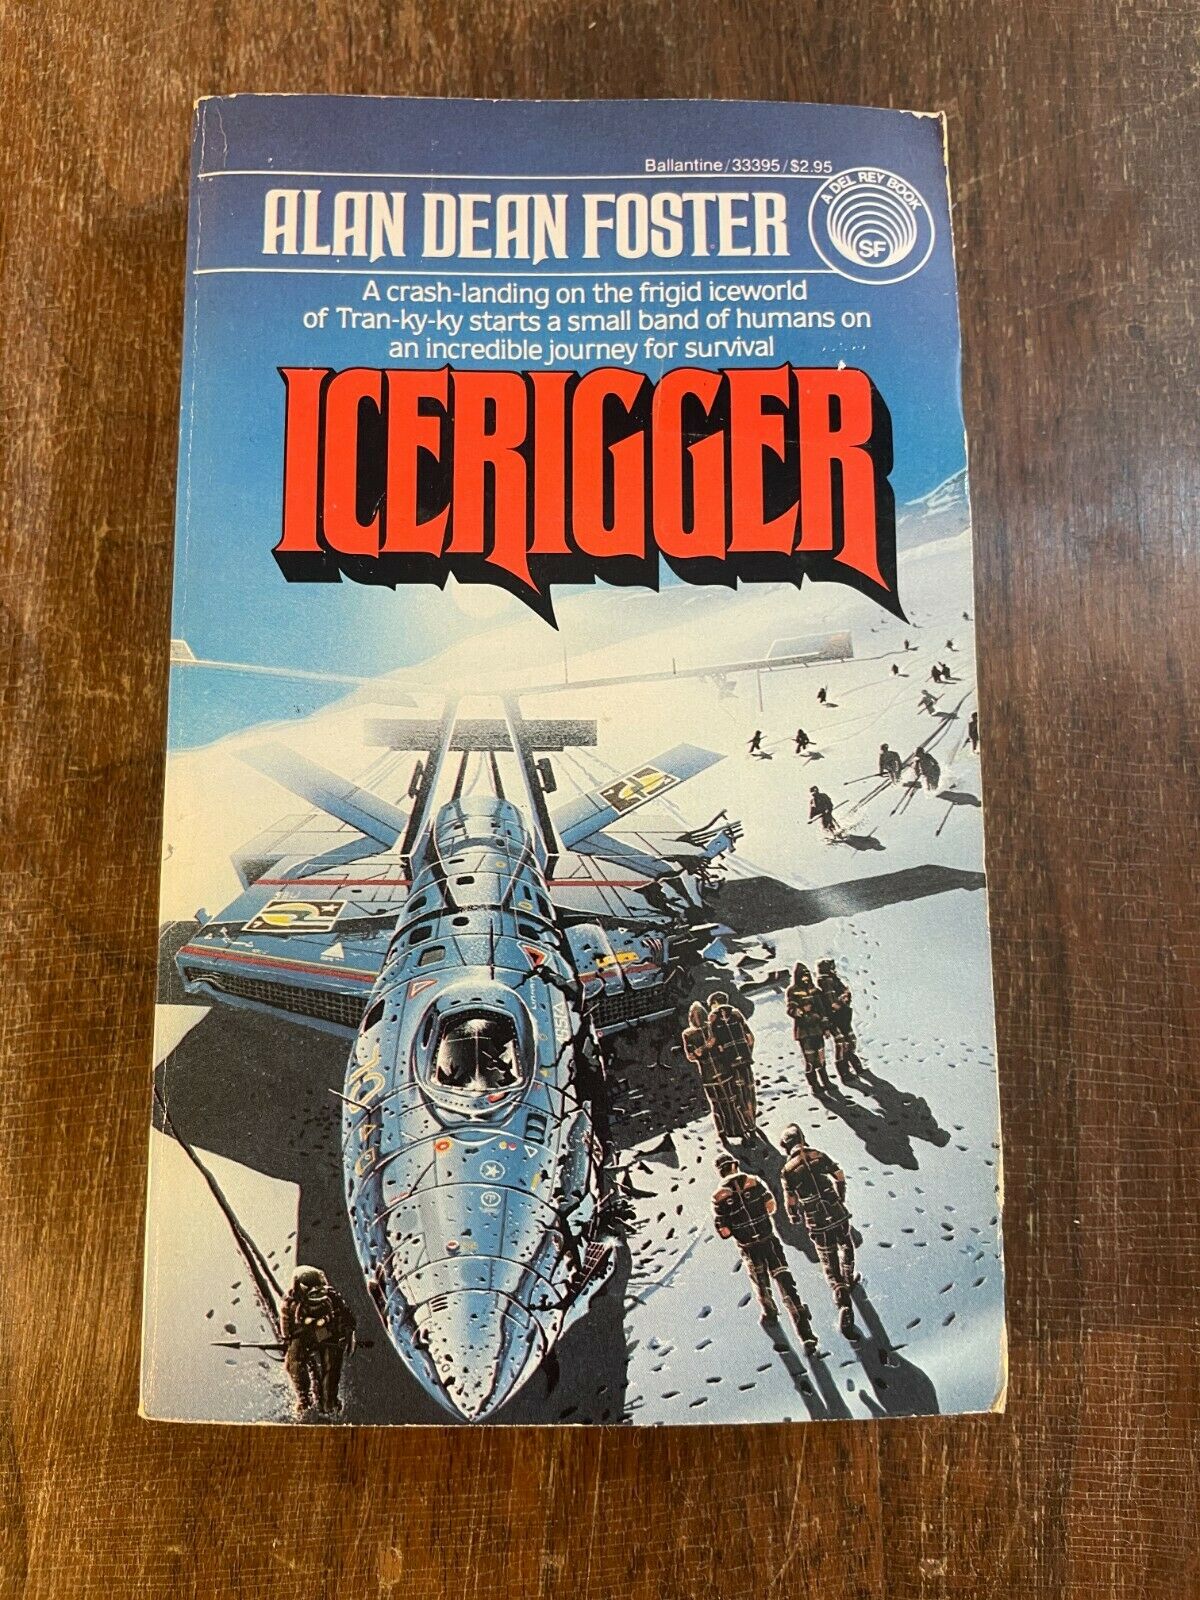 Icerigger & Mission To Moulokin by Alan Dean Foster Ethan Fortune Series (Q1)